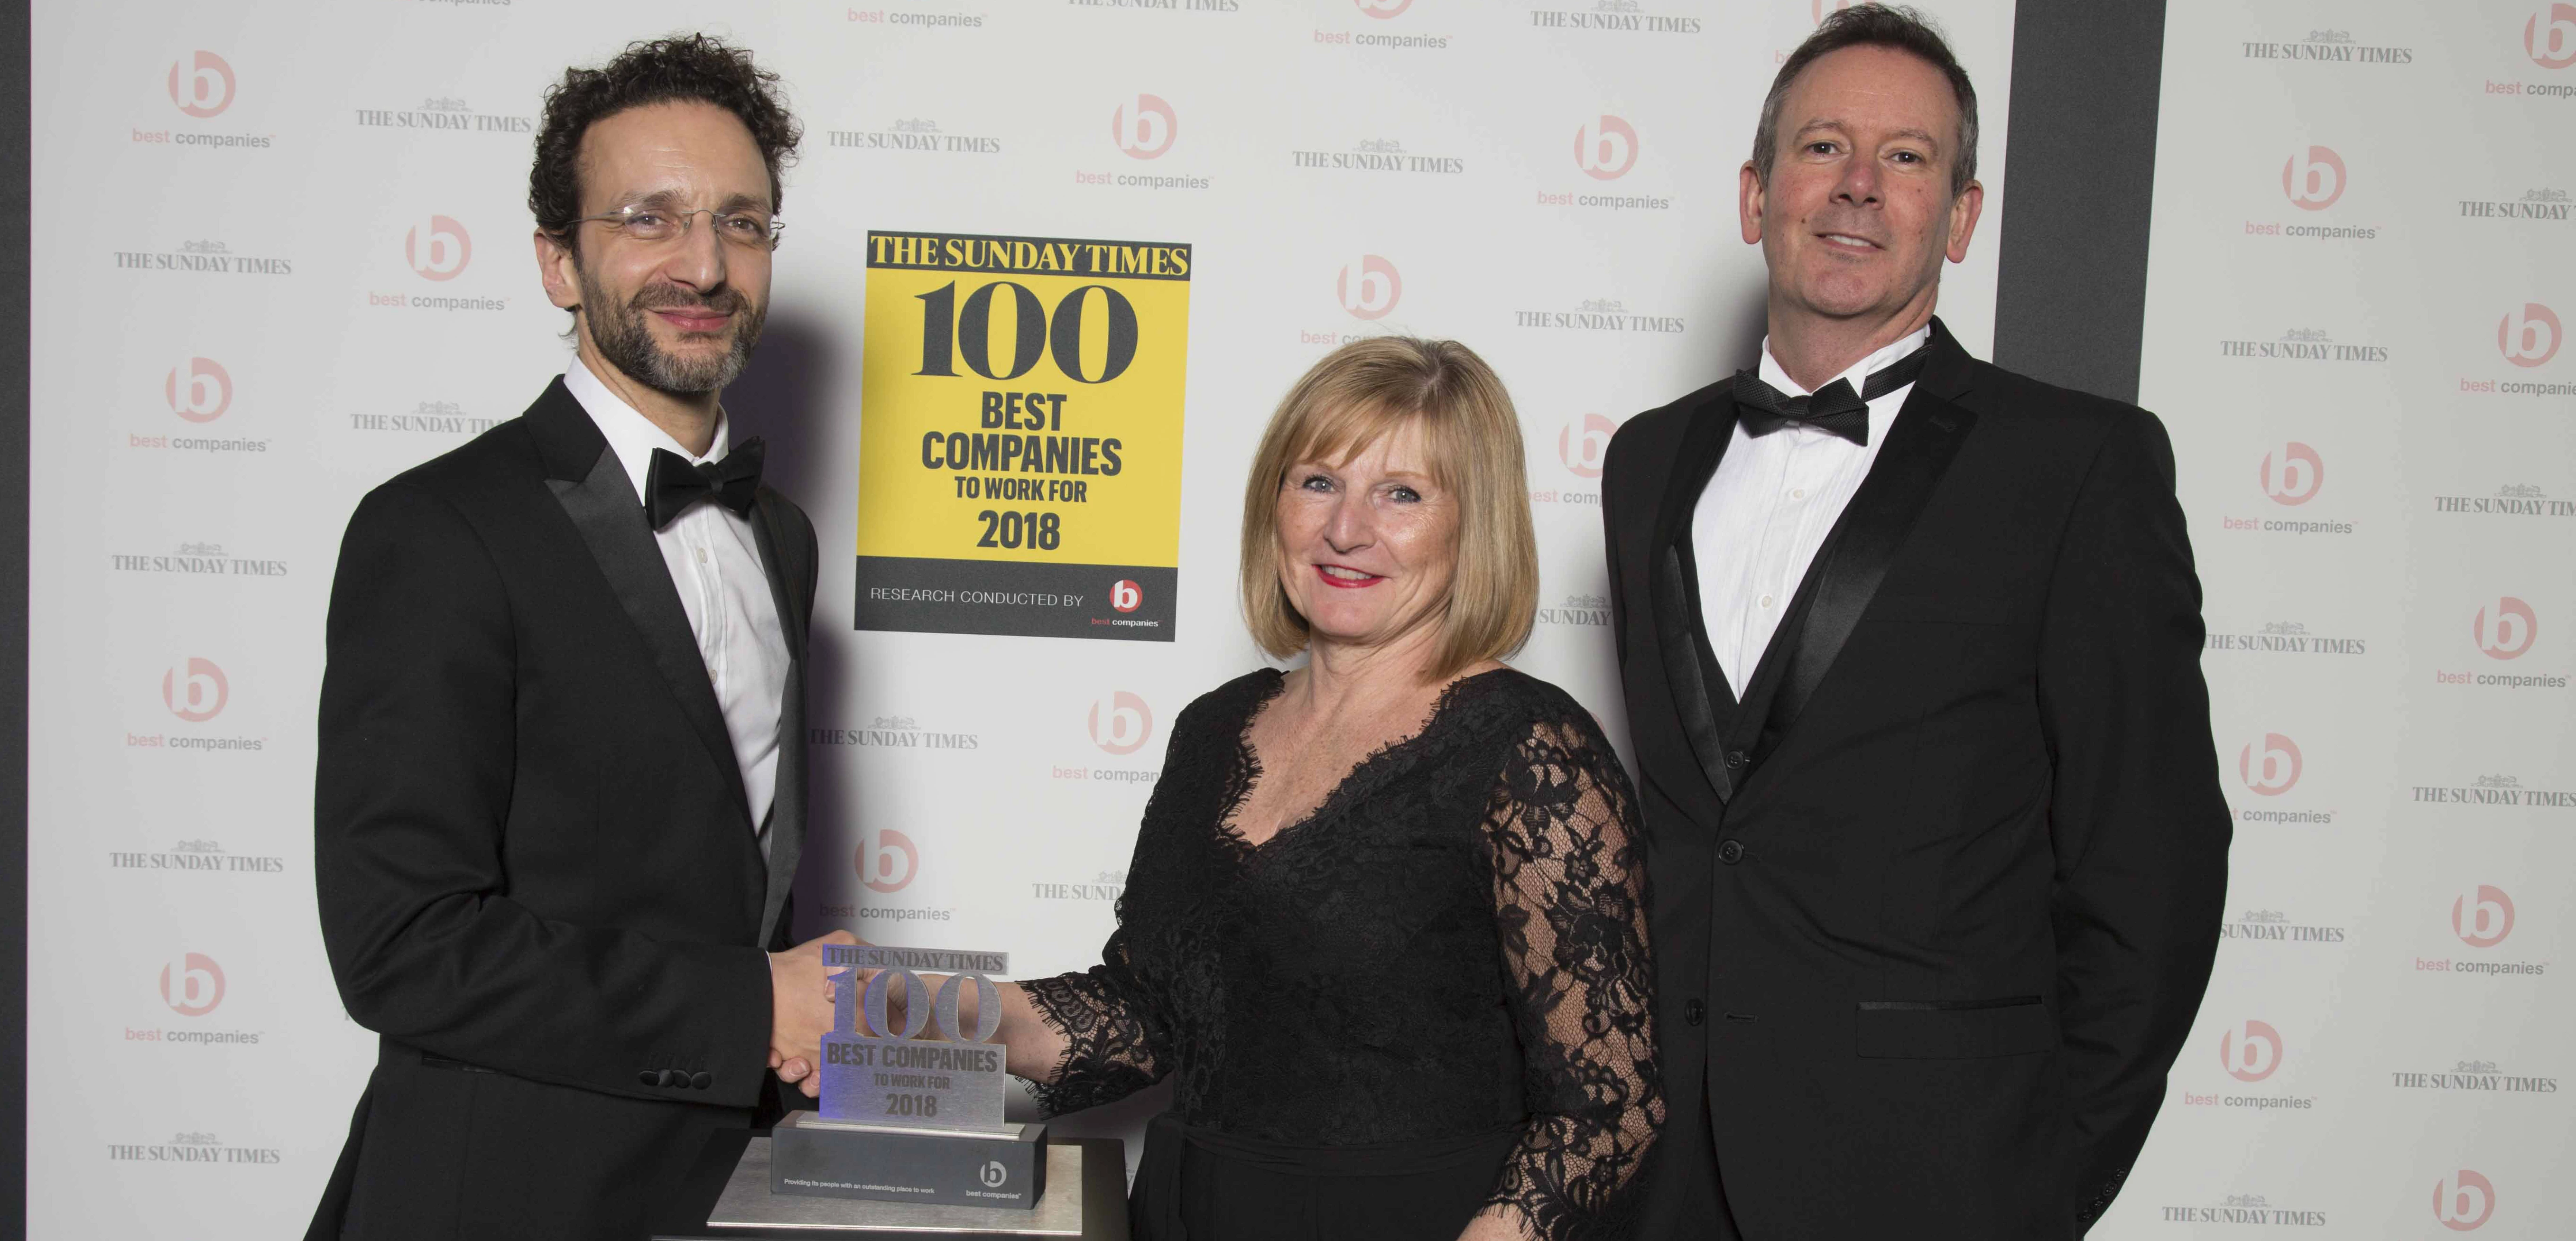 Left to right Nick Rodrigues, deputy editor, The Sunday Times 100 Best Companies presenting the award to Carole Carson, CEO & Adrian Fanthham, Chief Finance Officer.